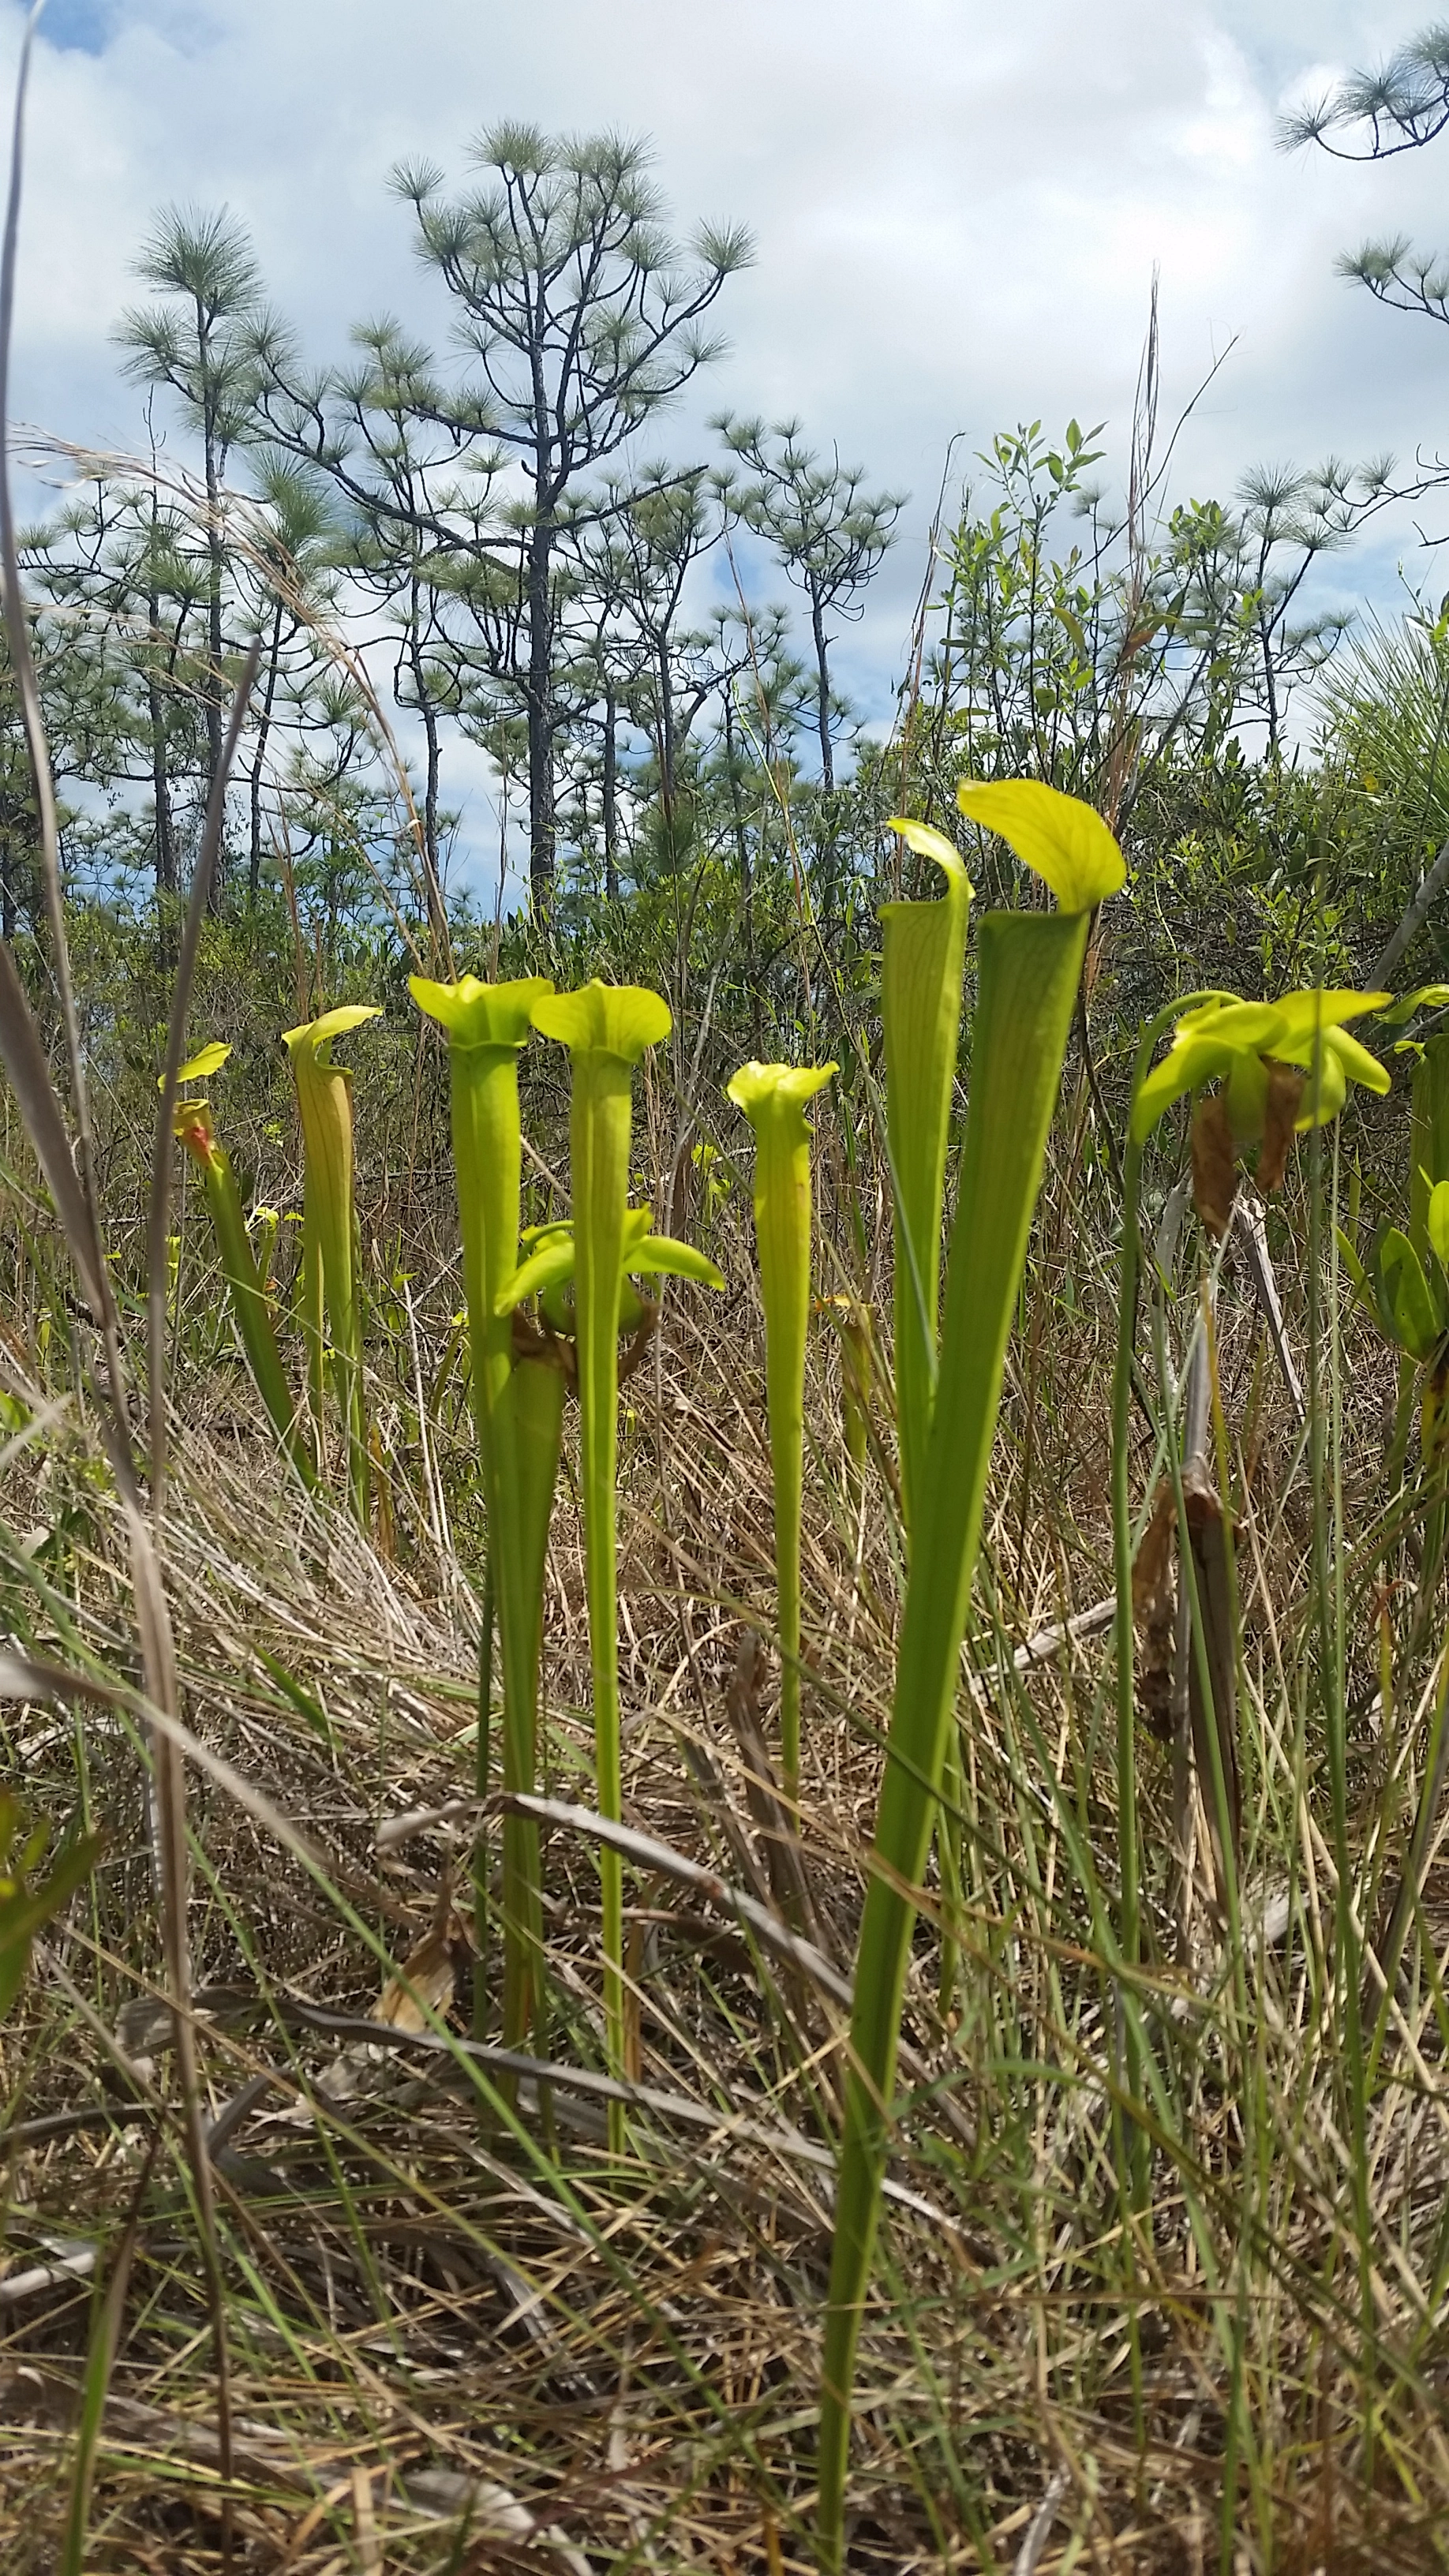 Grasses and light green pitcher plants, with young pines in the background.